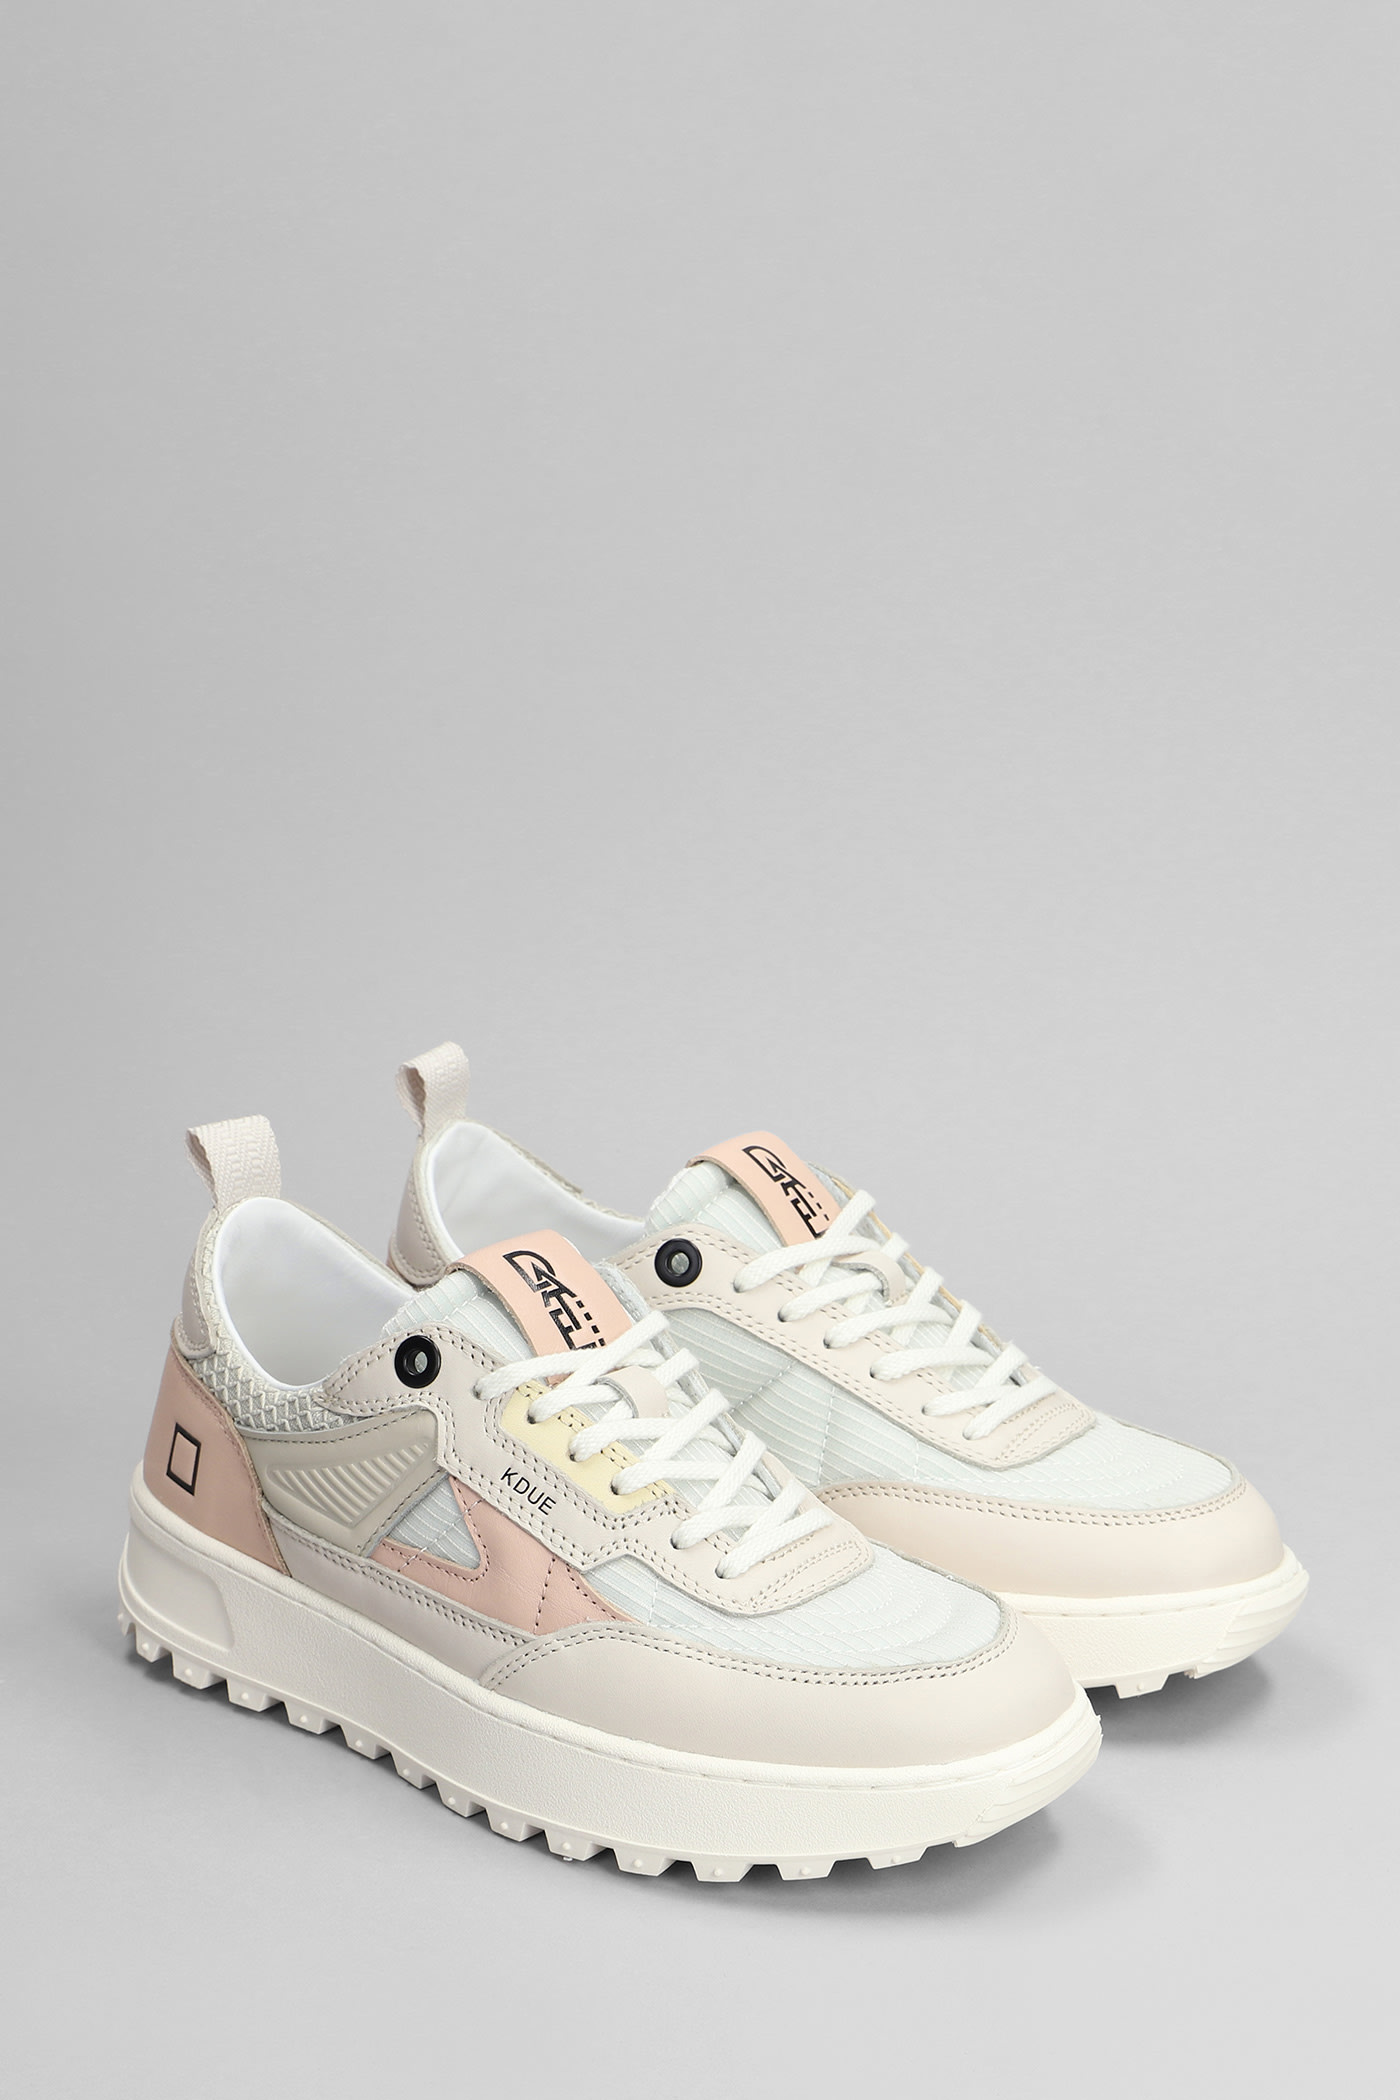 Shop Date Kdue Sneakers In Rose-pink Leather And Fabric